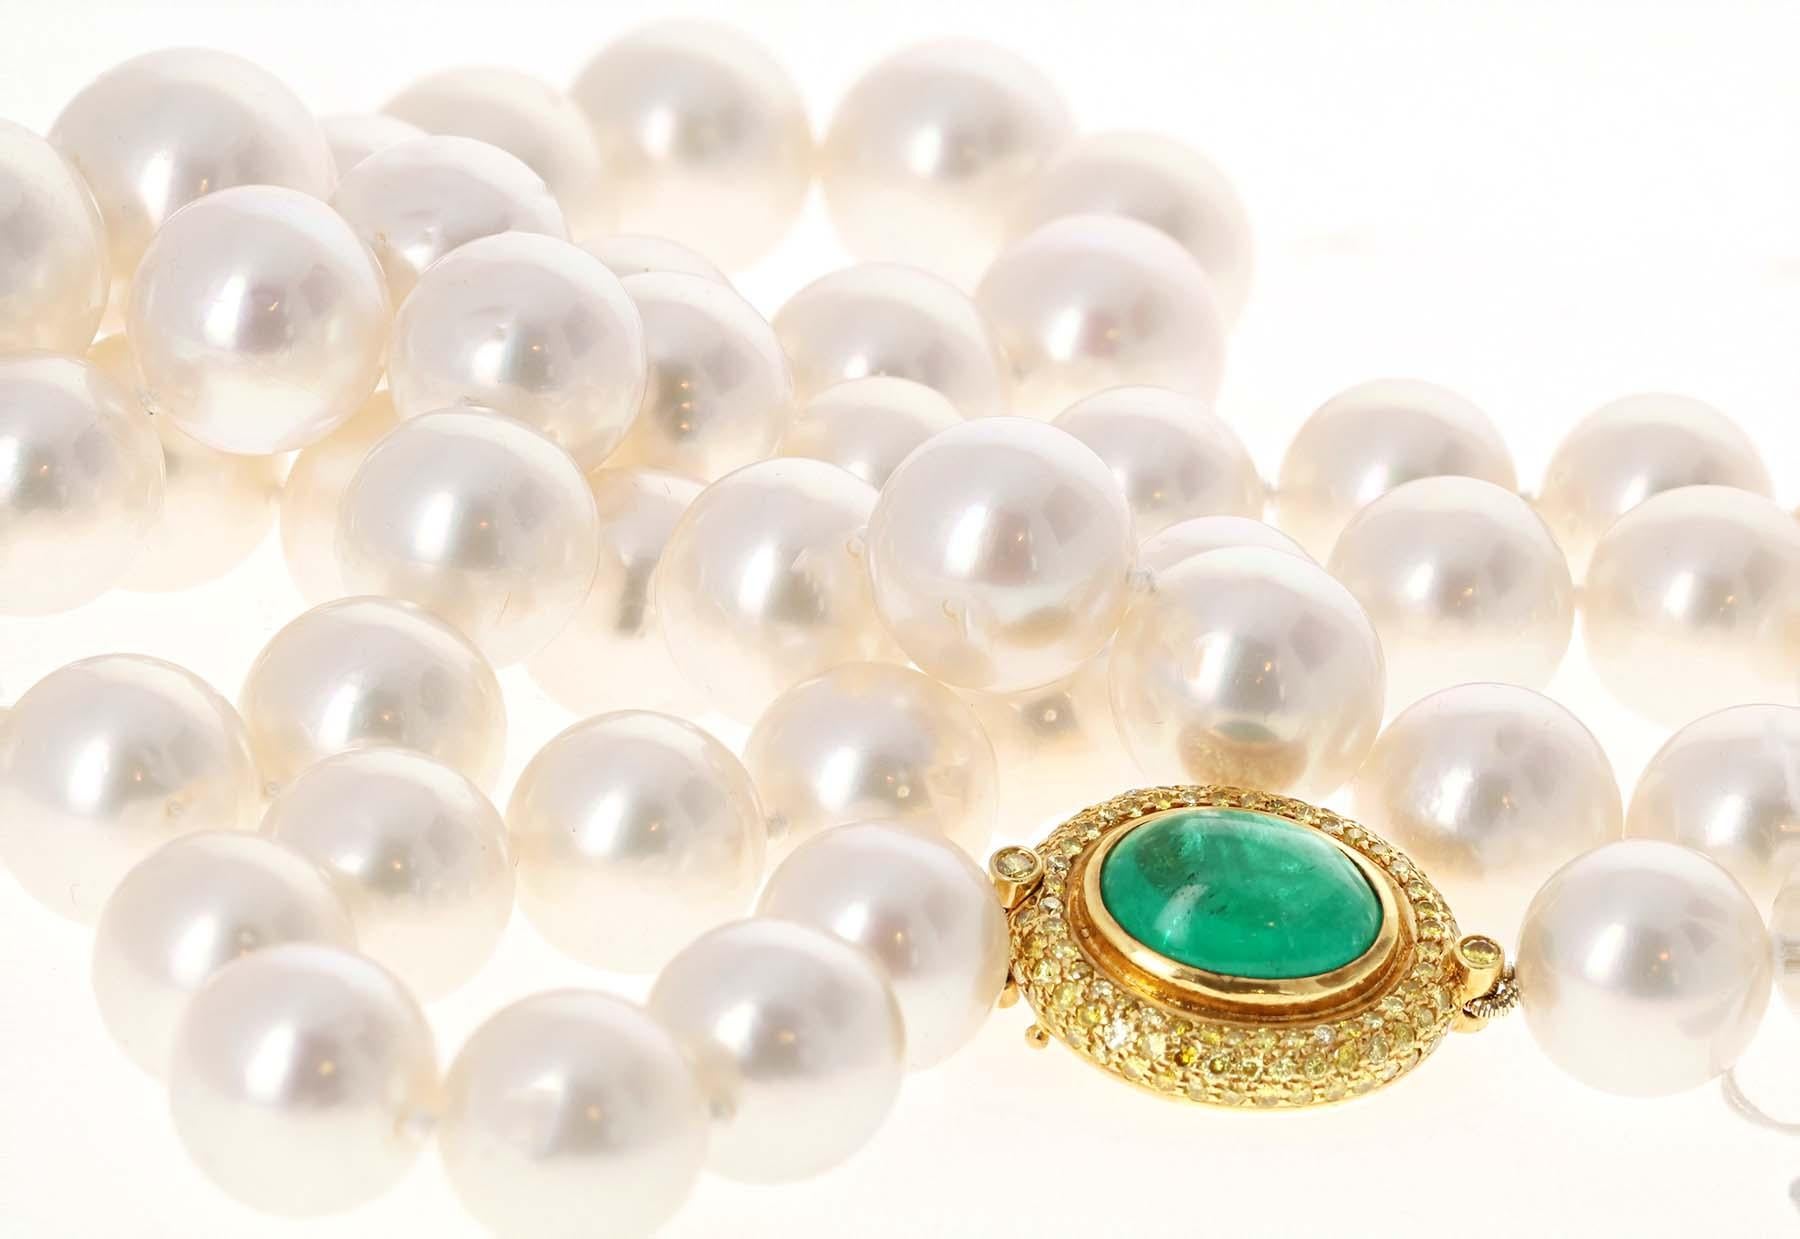 This South Sea Pearl Necklace features 59 lustrous pearls with beautiful nacre and minimal pitting. The lustrous pearls increase in size from 12 to 16 millimeters. The center pearl is a perfect size of 16 millimeters. elegantly hand strung together